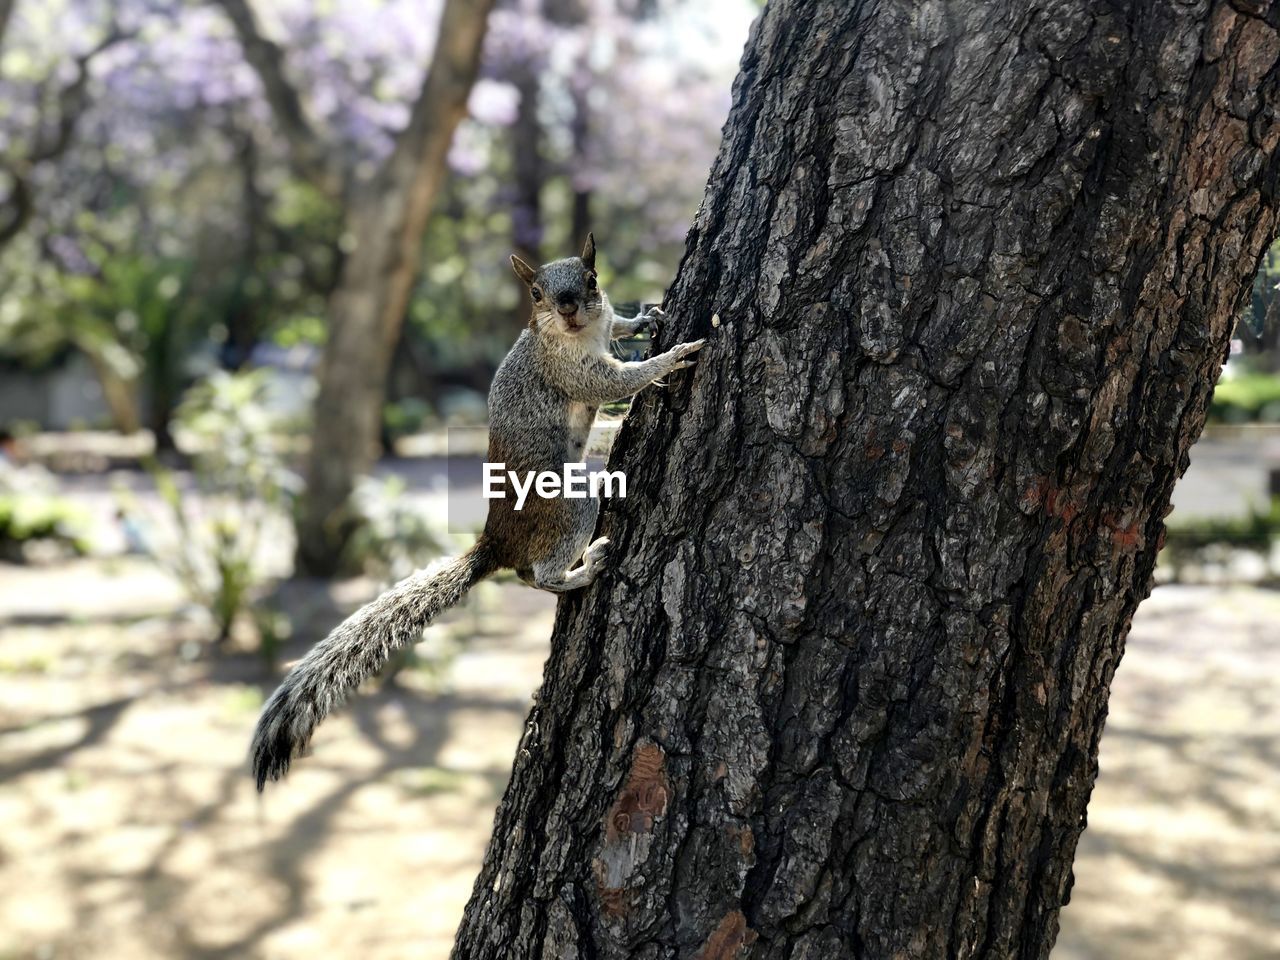 Close-up of squirrel on tree trunk on park